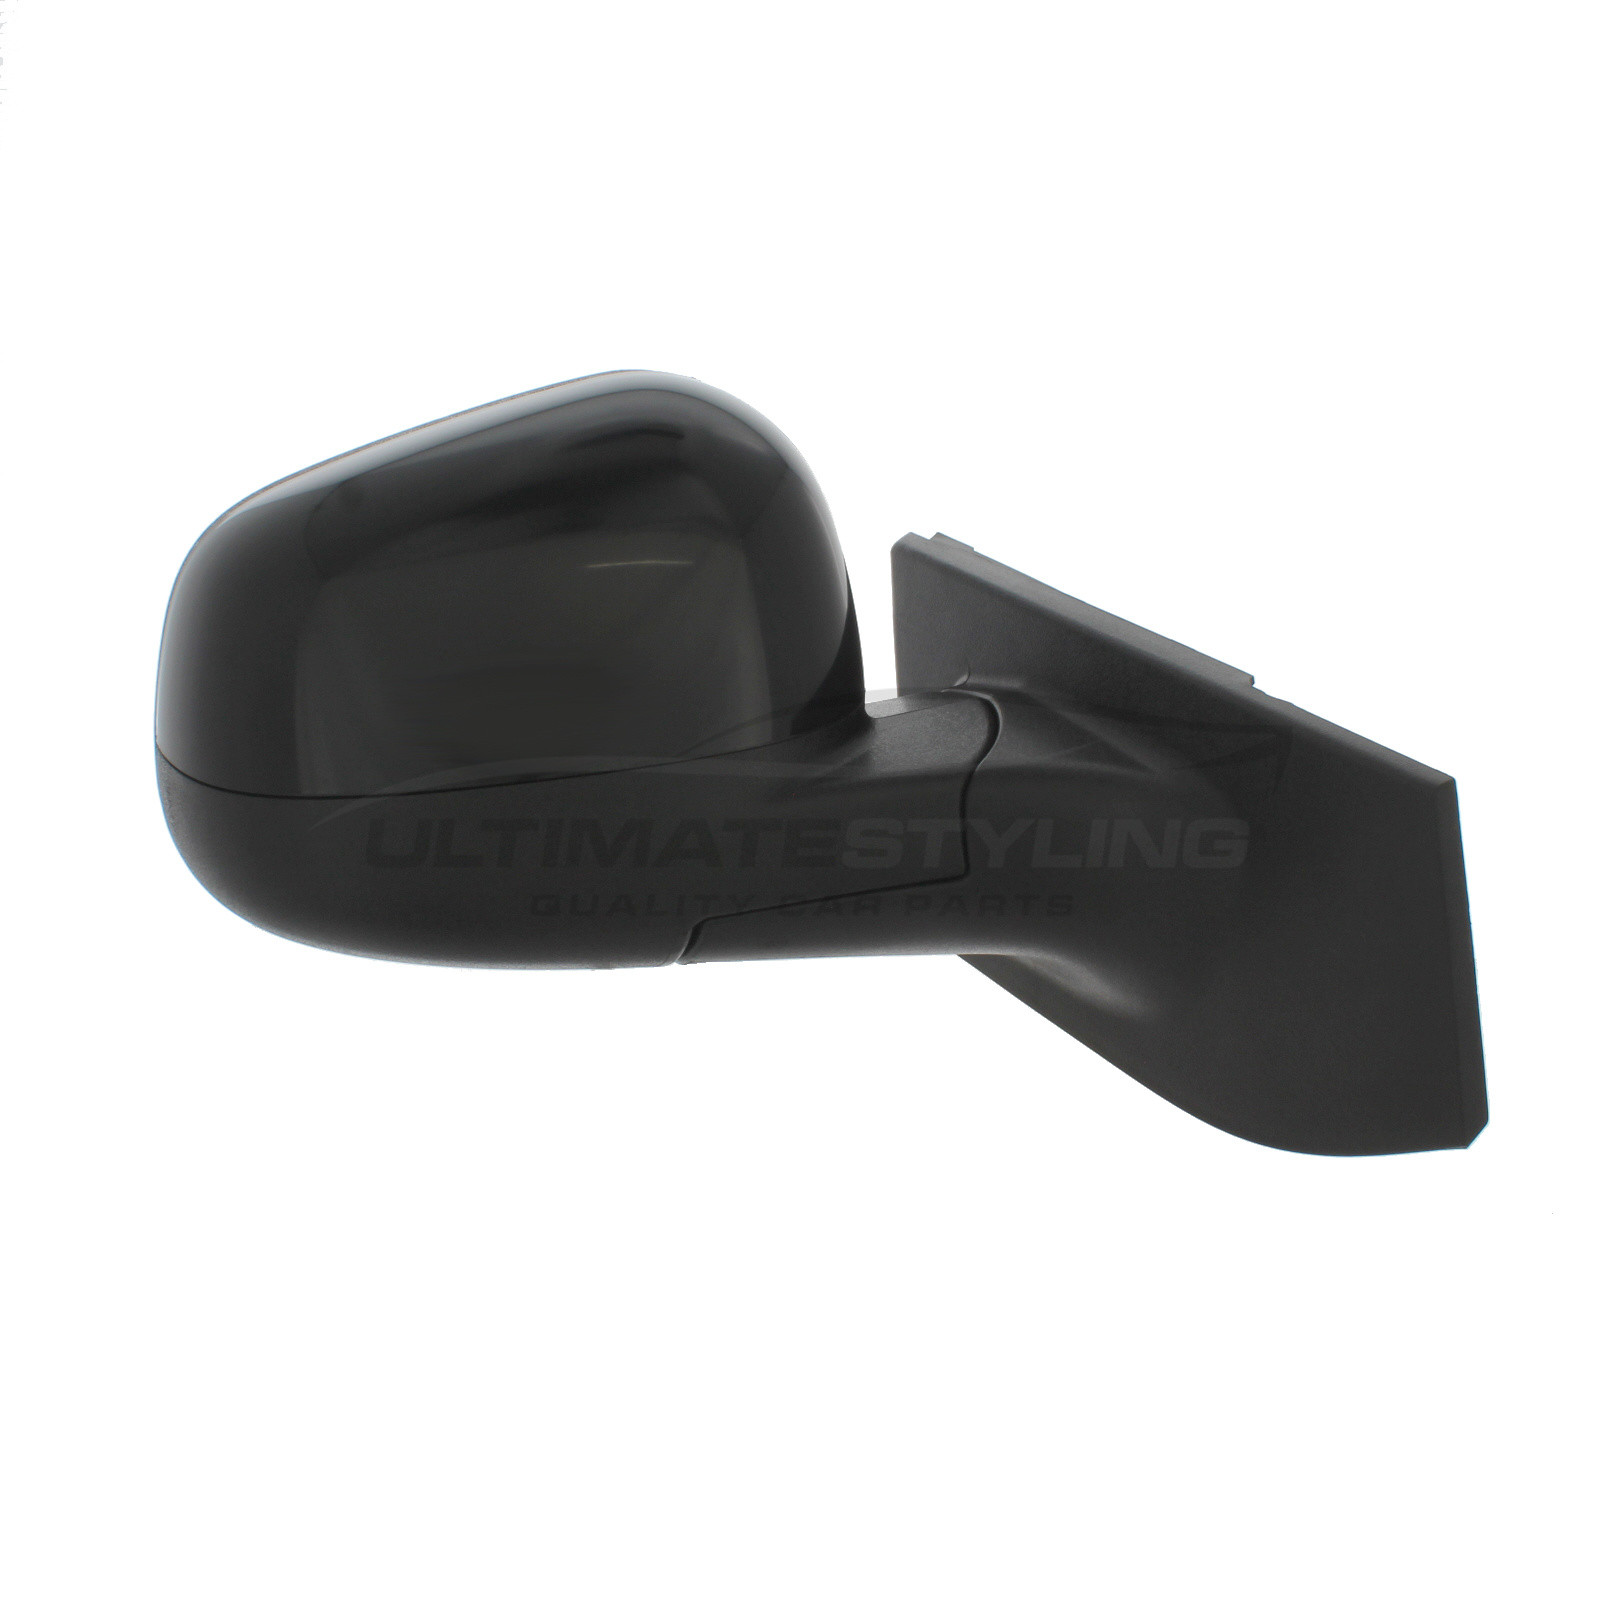 Chevrolet Spark Wing Mirror / Door Mirror - Drivers Side (RH) - Electric adjustment - Heated Glass - Paintable - Black